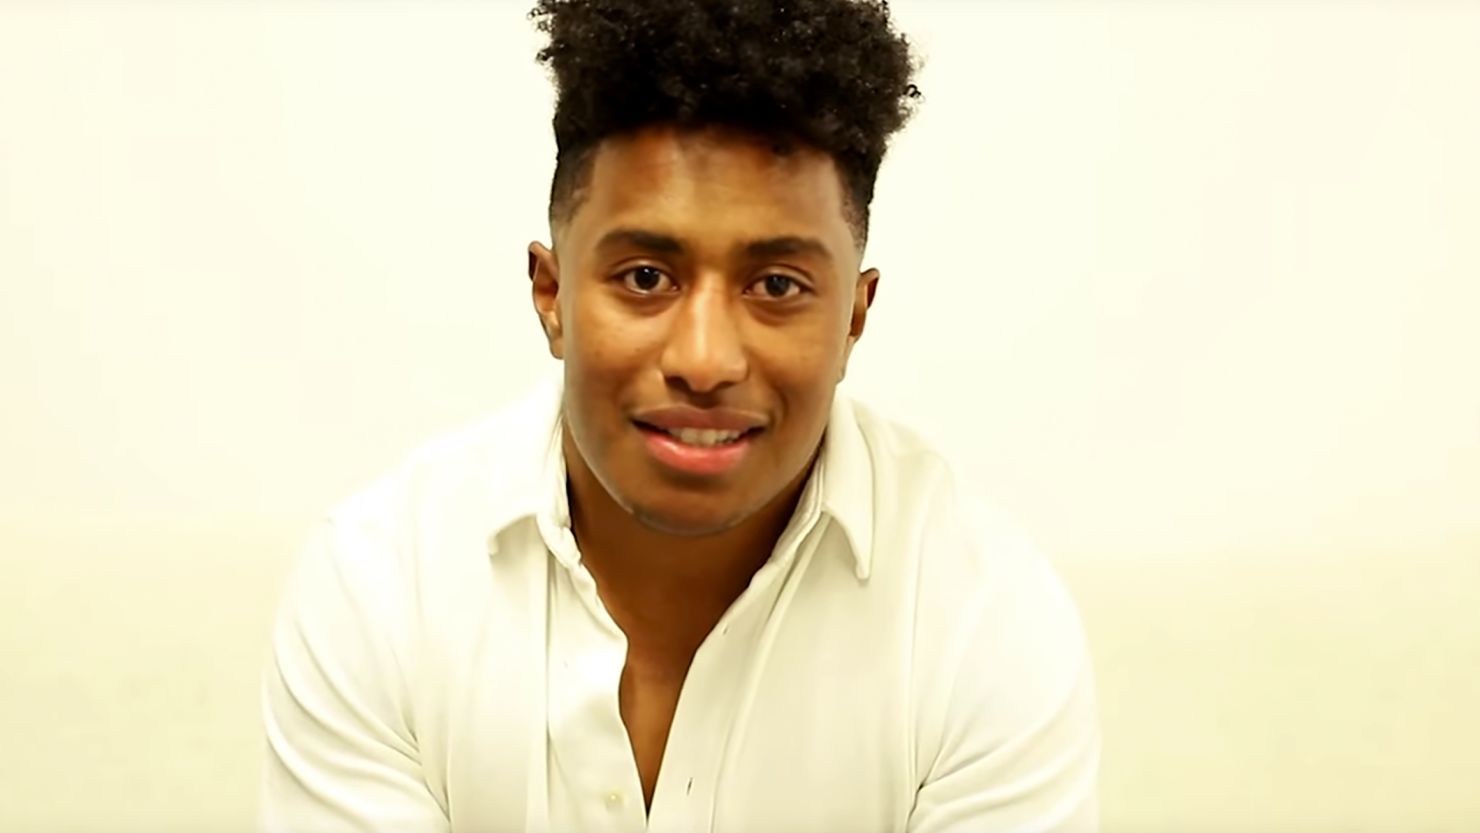 Green announced his transition in a video posted by the Bingham Cup, the biennial world championships of gay and inclusive rugby.